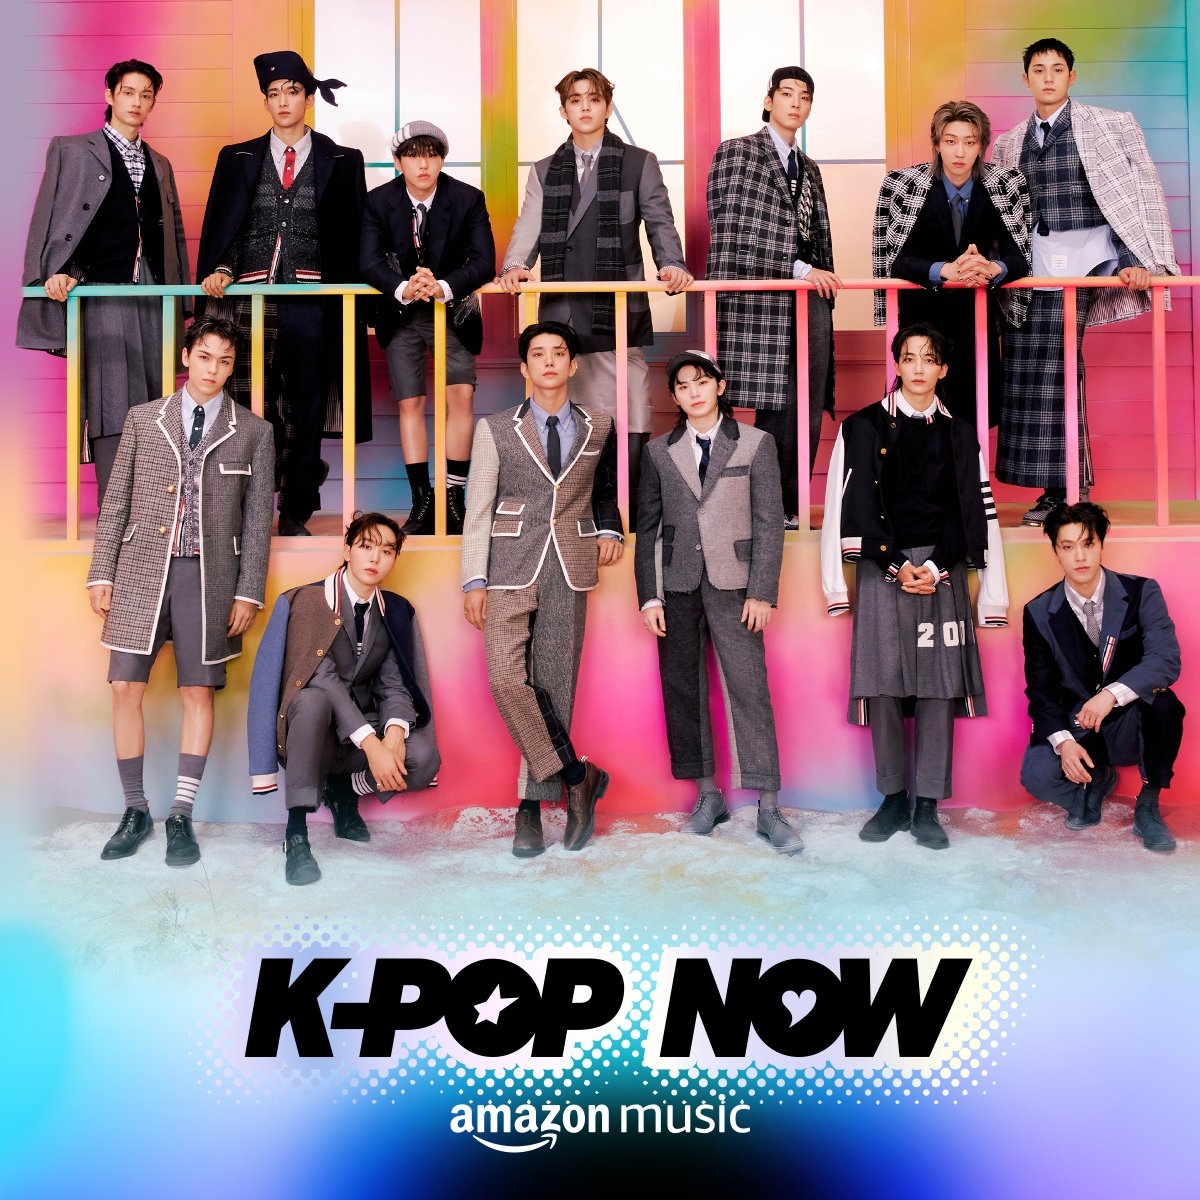 [NEWS] SEVENTEEN is on the cover of @amazonmusicjp's K-POP NOW playlist and you can also listen to MAESTRO on @amazonmusic's Fresh Pop playlist. Check out MAESTRO now! 💎 music.amazon.com/playlists/B07S… 💎 Interscope.lnk.to/FreshPop #SEVENTEEN #세븐틴 #17_IS_RIGHT_HERE #MAESTRO